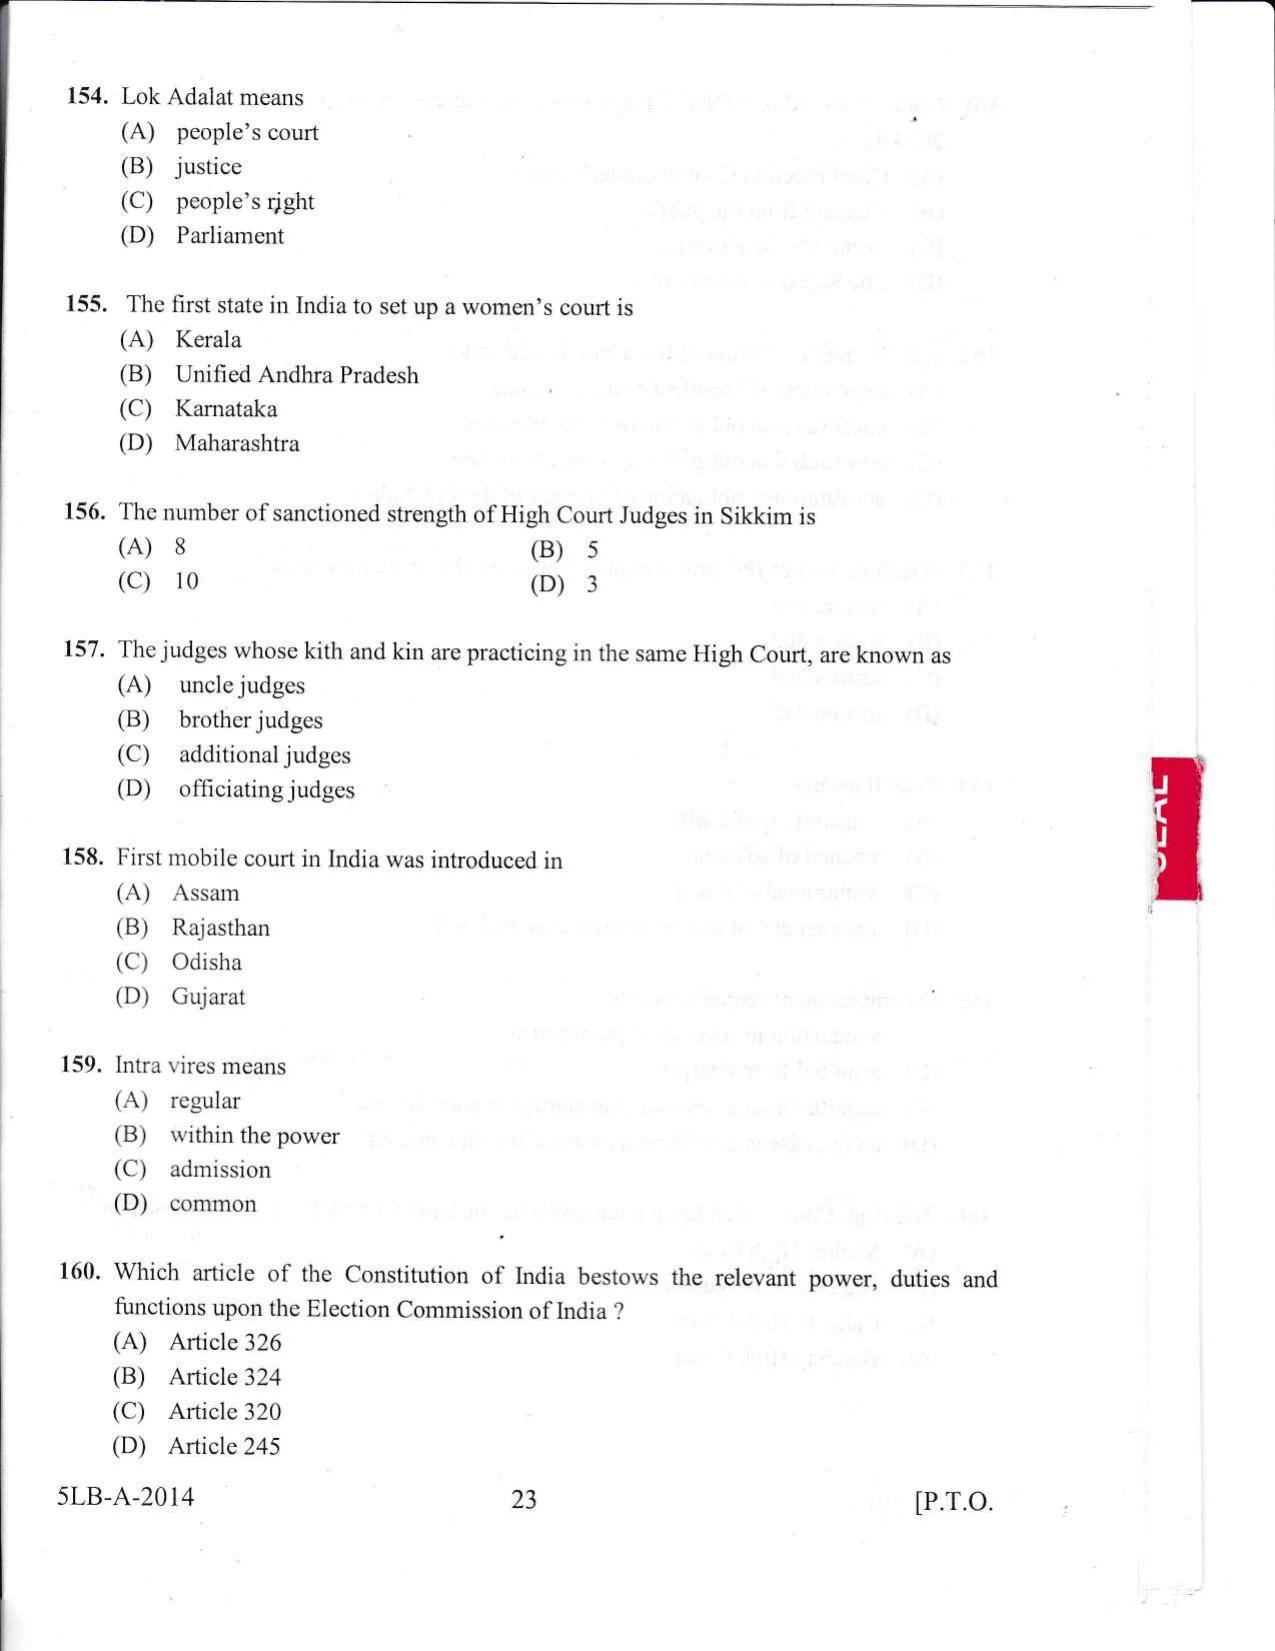 KLEE 5 Year LLB Exam 2014 Question Paper - Page 23